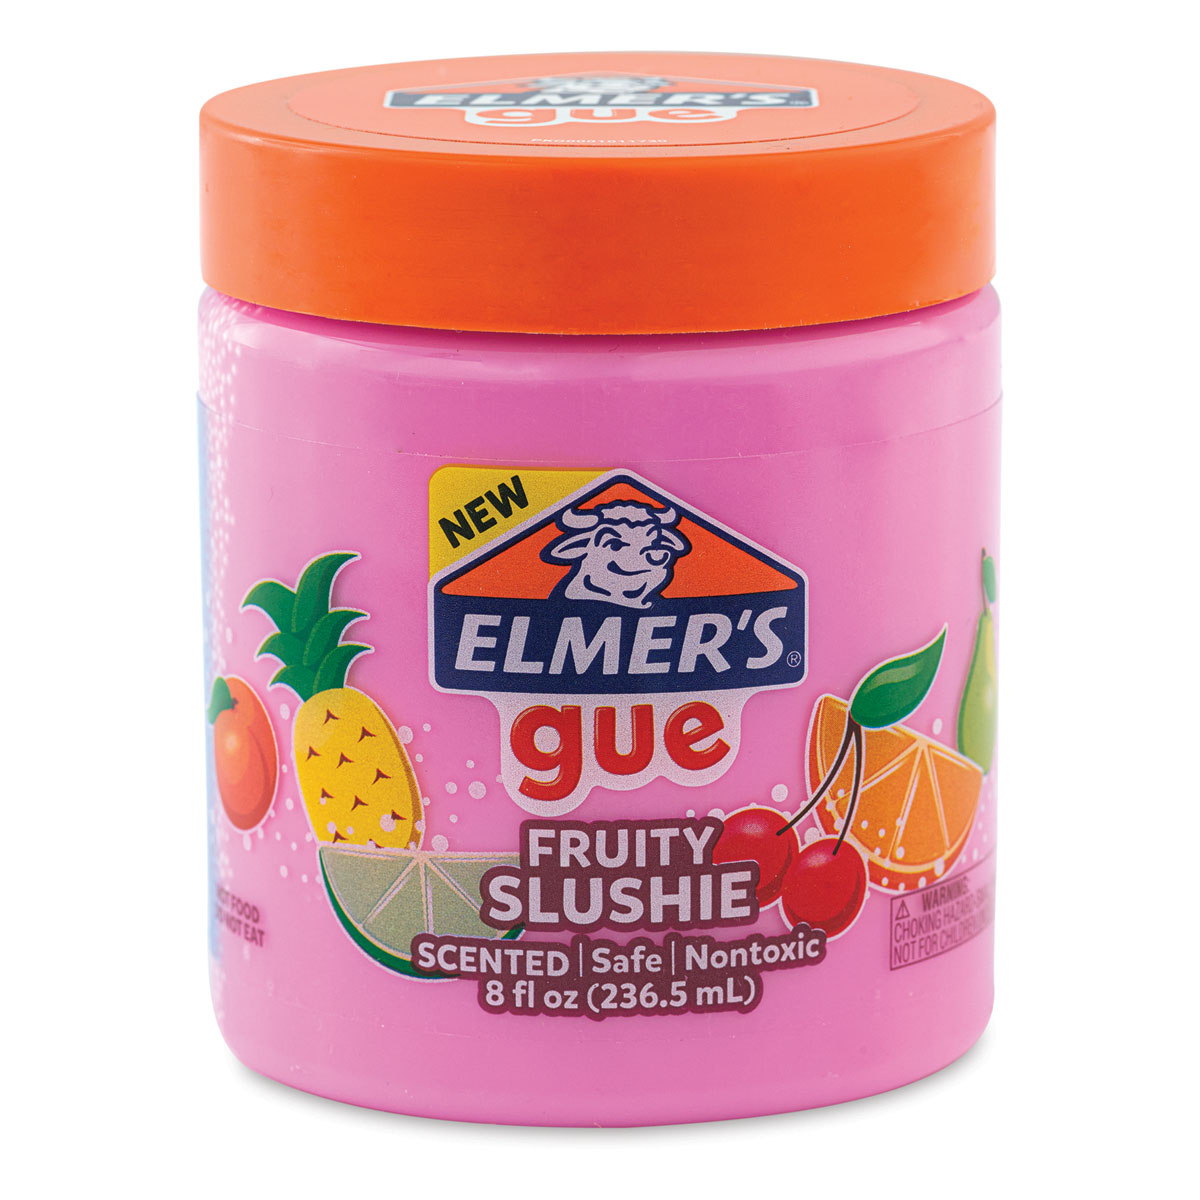 Elmer's Gue 3lb Glassy Clear Deluxe Premade Slime Kit With Mix-ins, slimes  